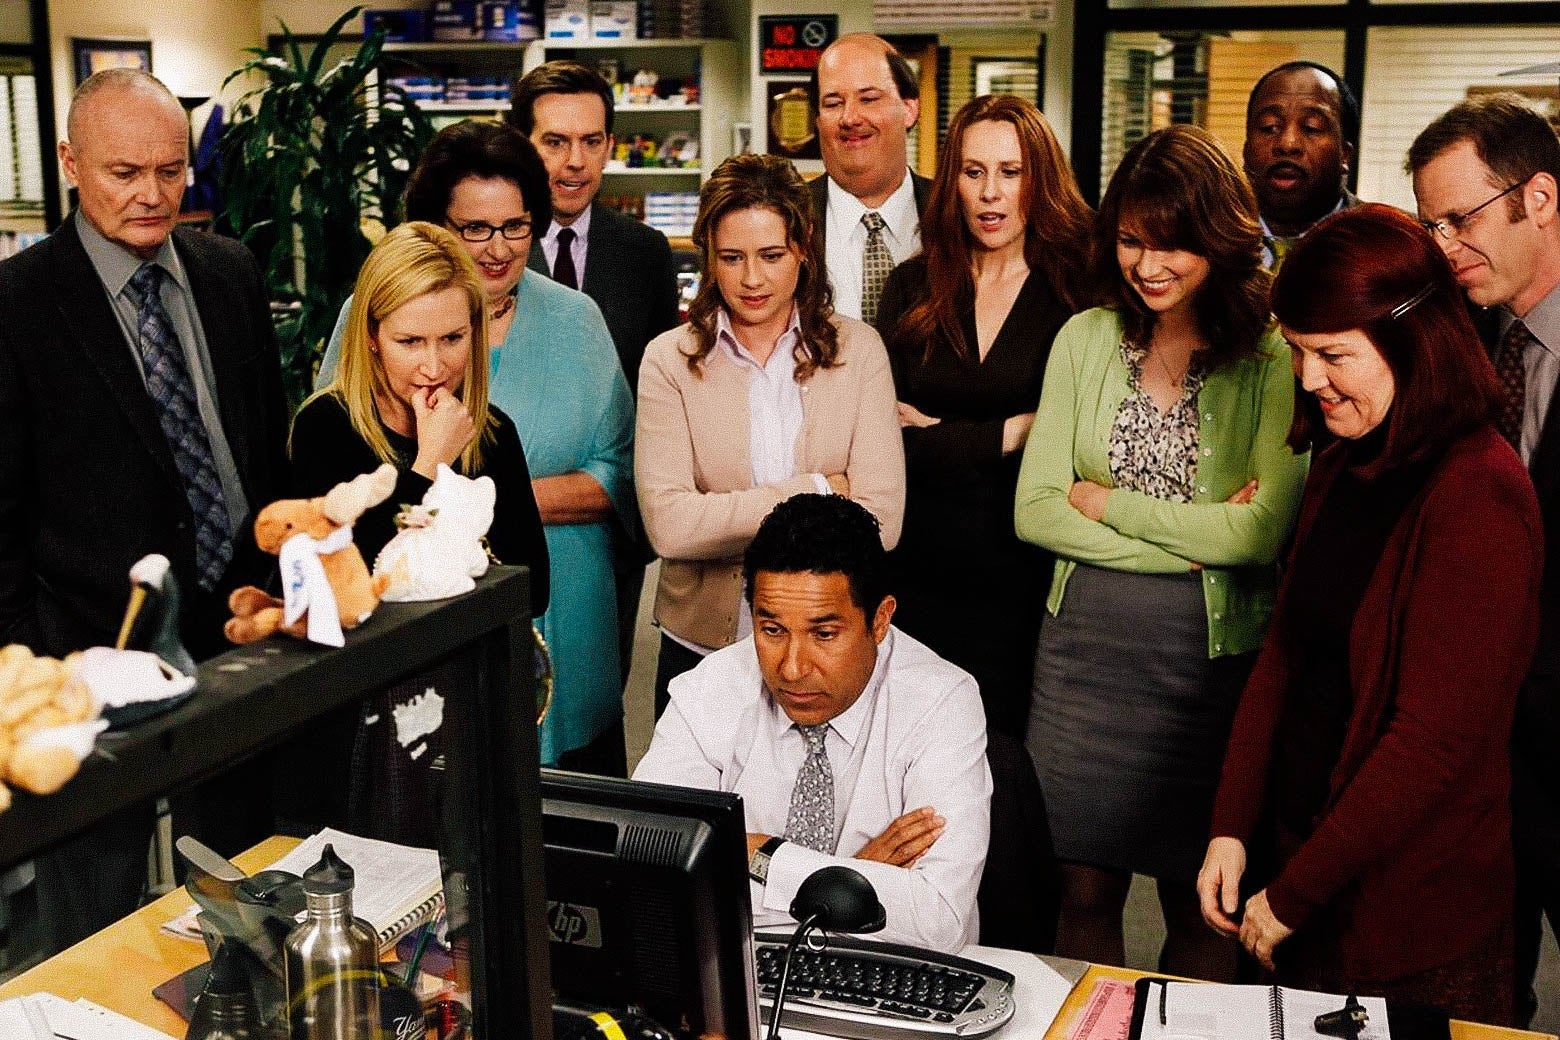 Everyone on The Office huddles around Oscar’s computer.